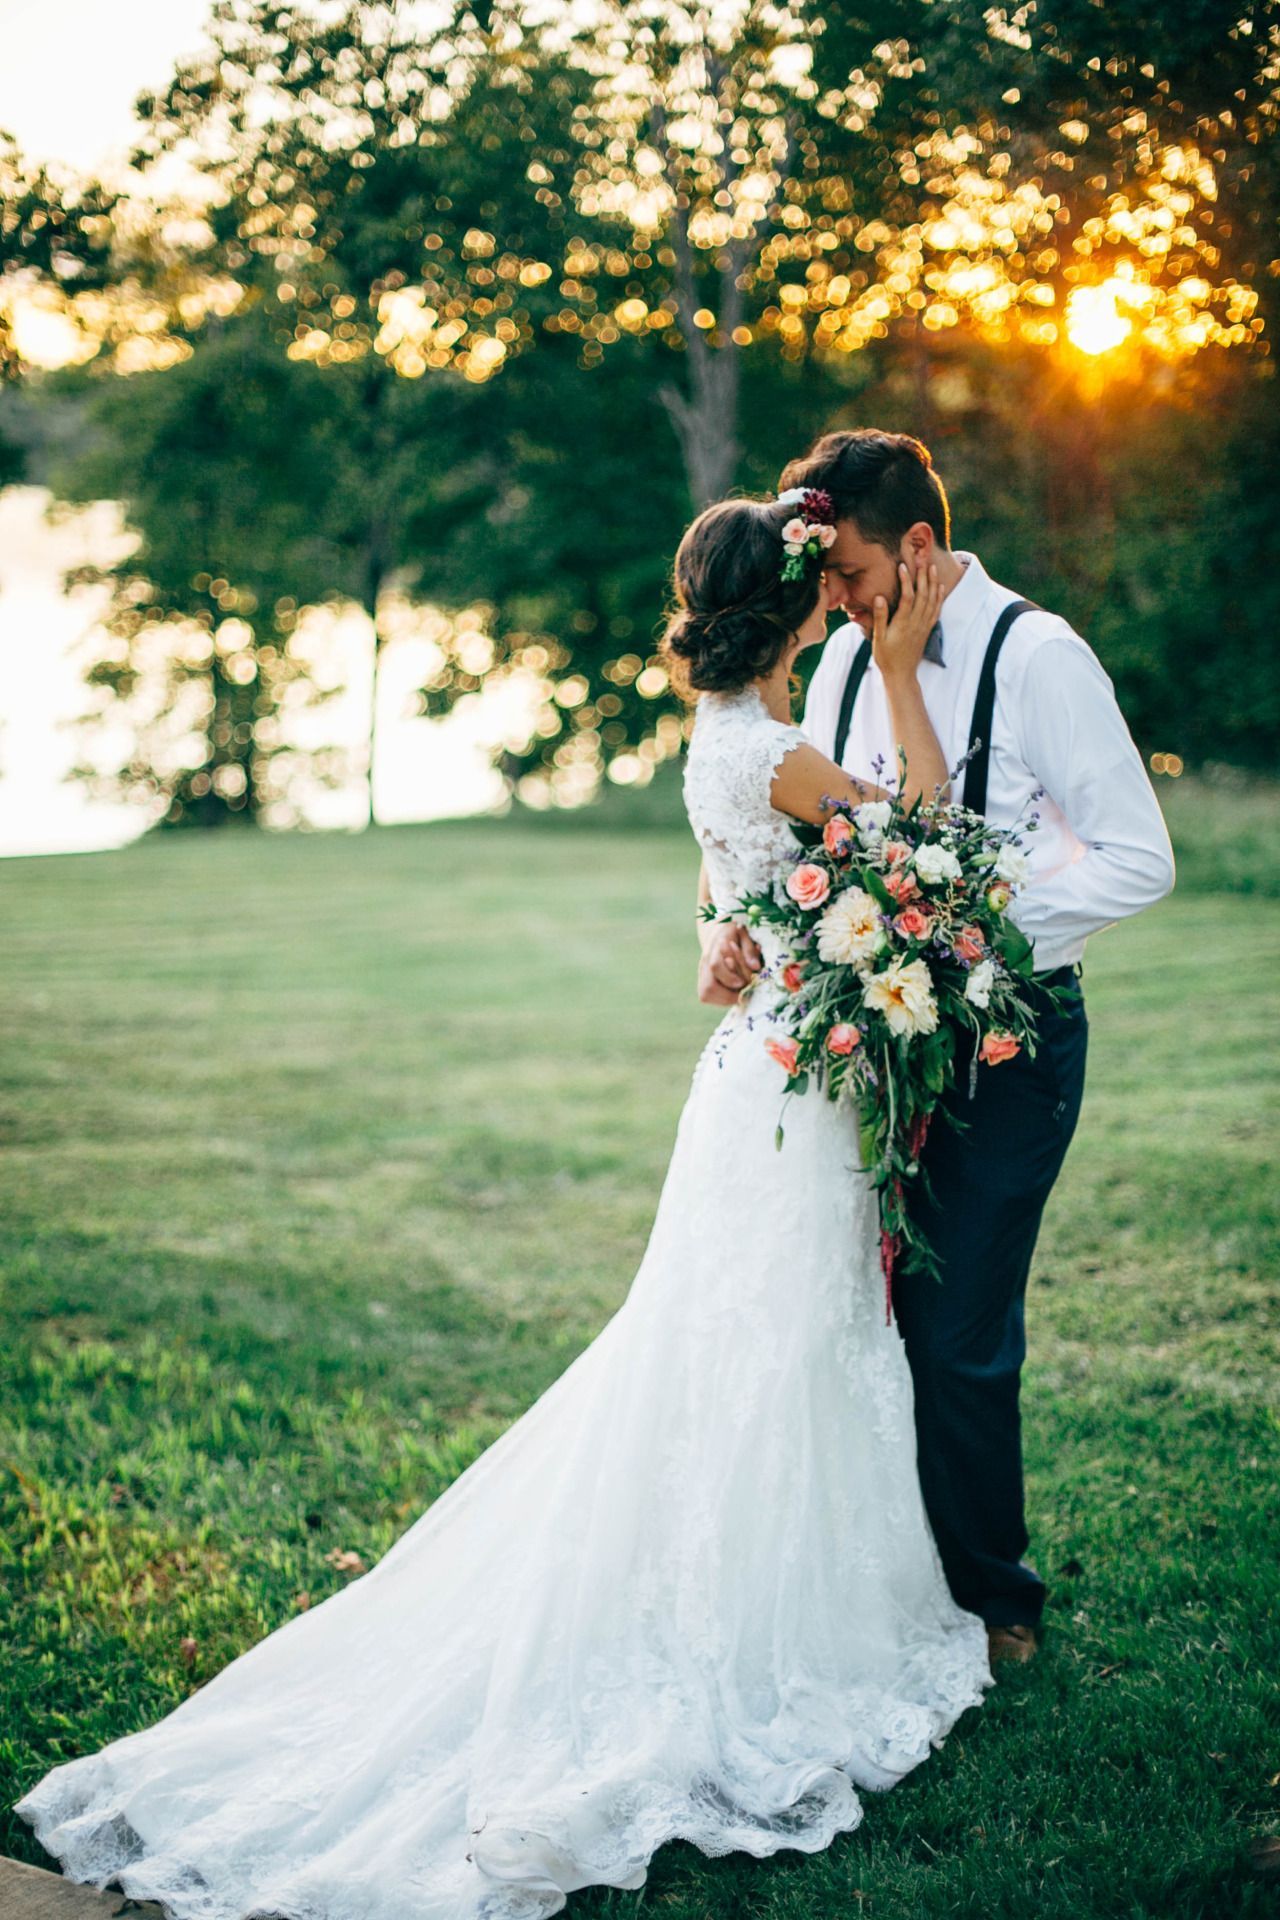 sunset by the water. great use of greenery in this bouquet.